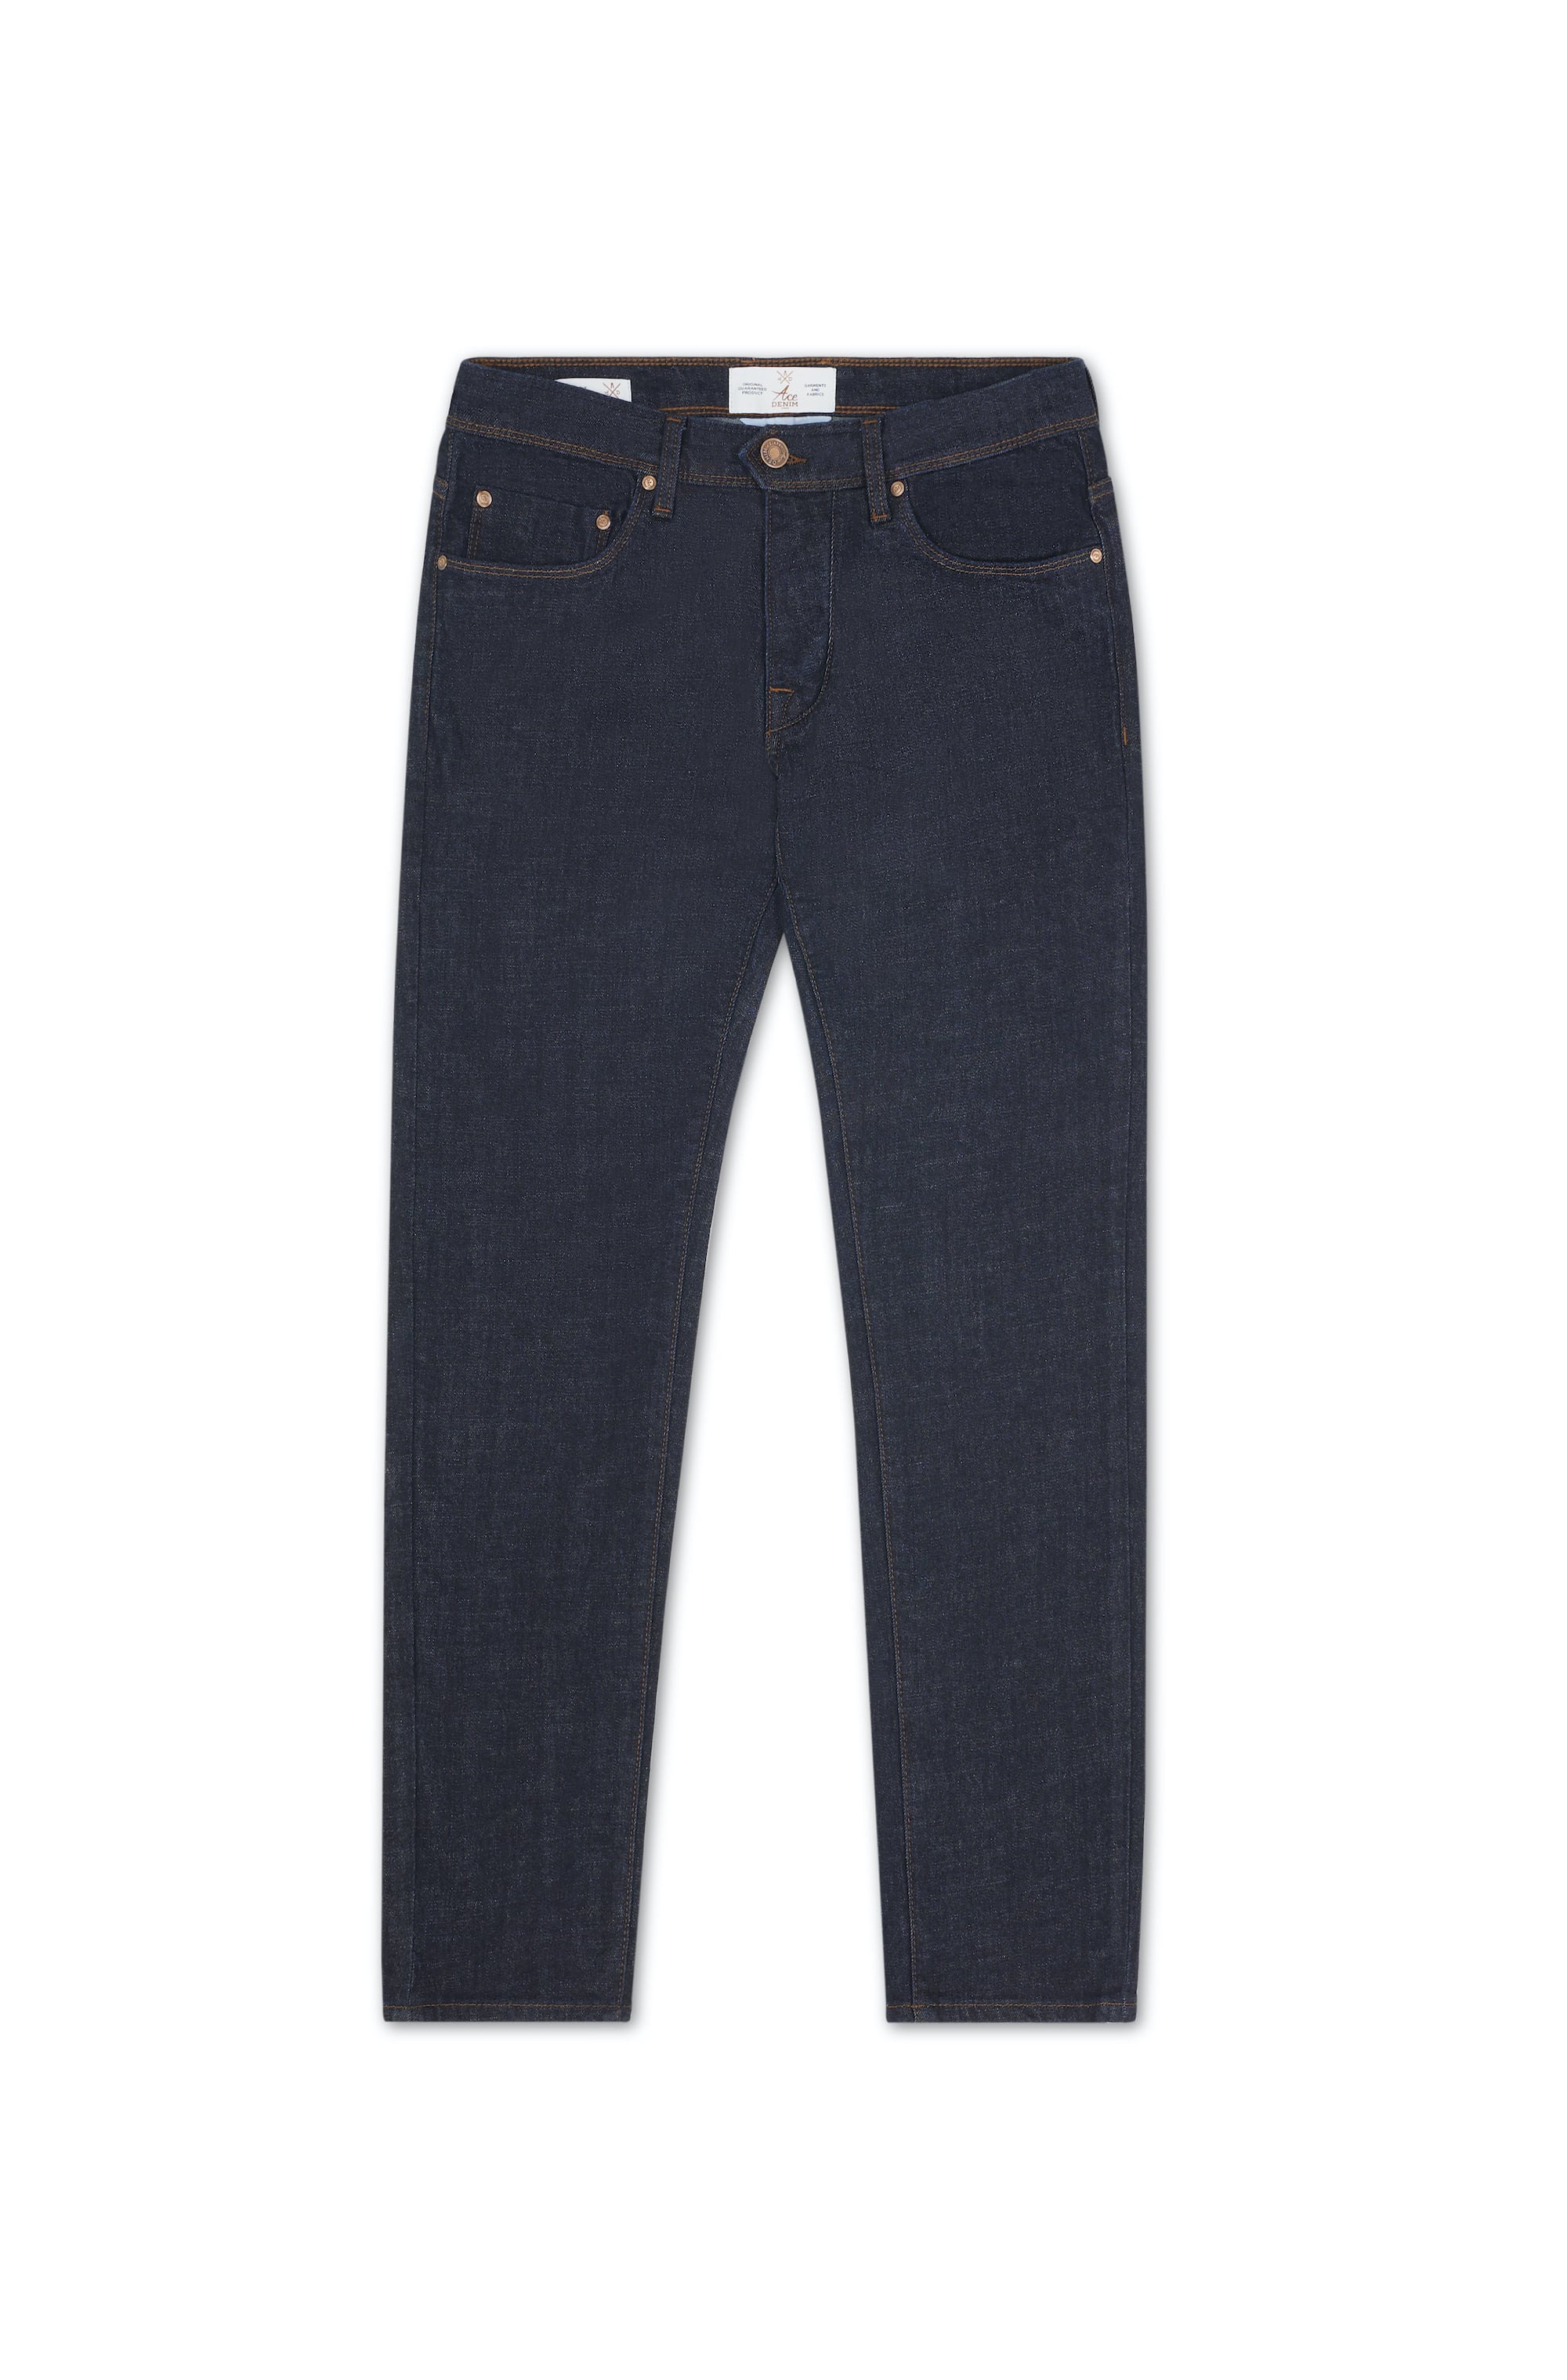 jeans homme denim brut coupe straight